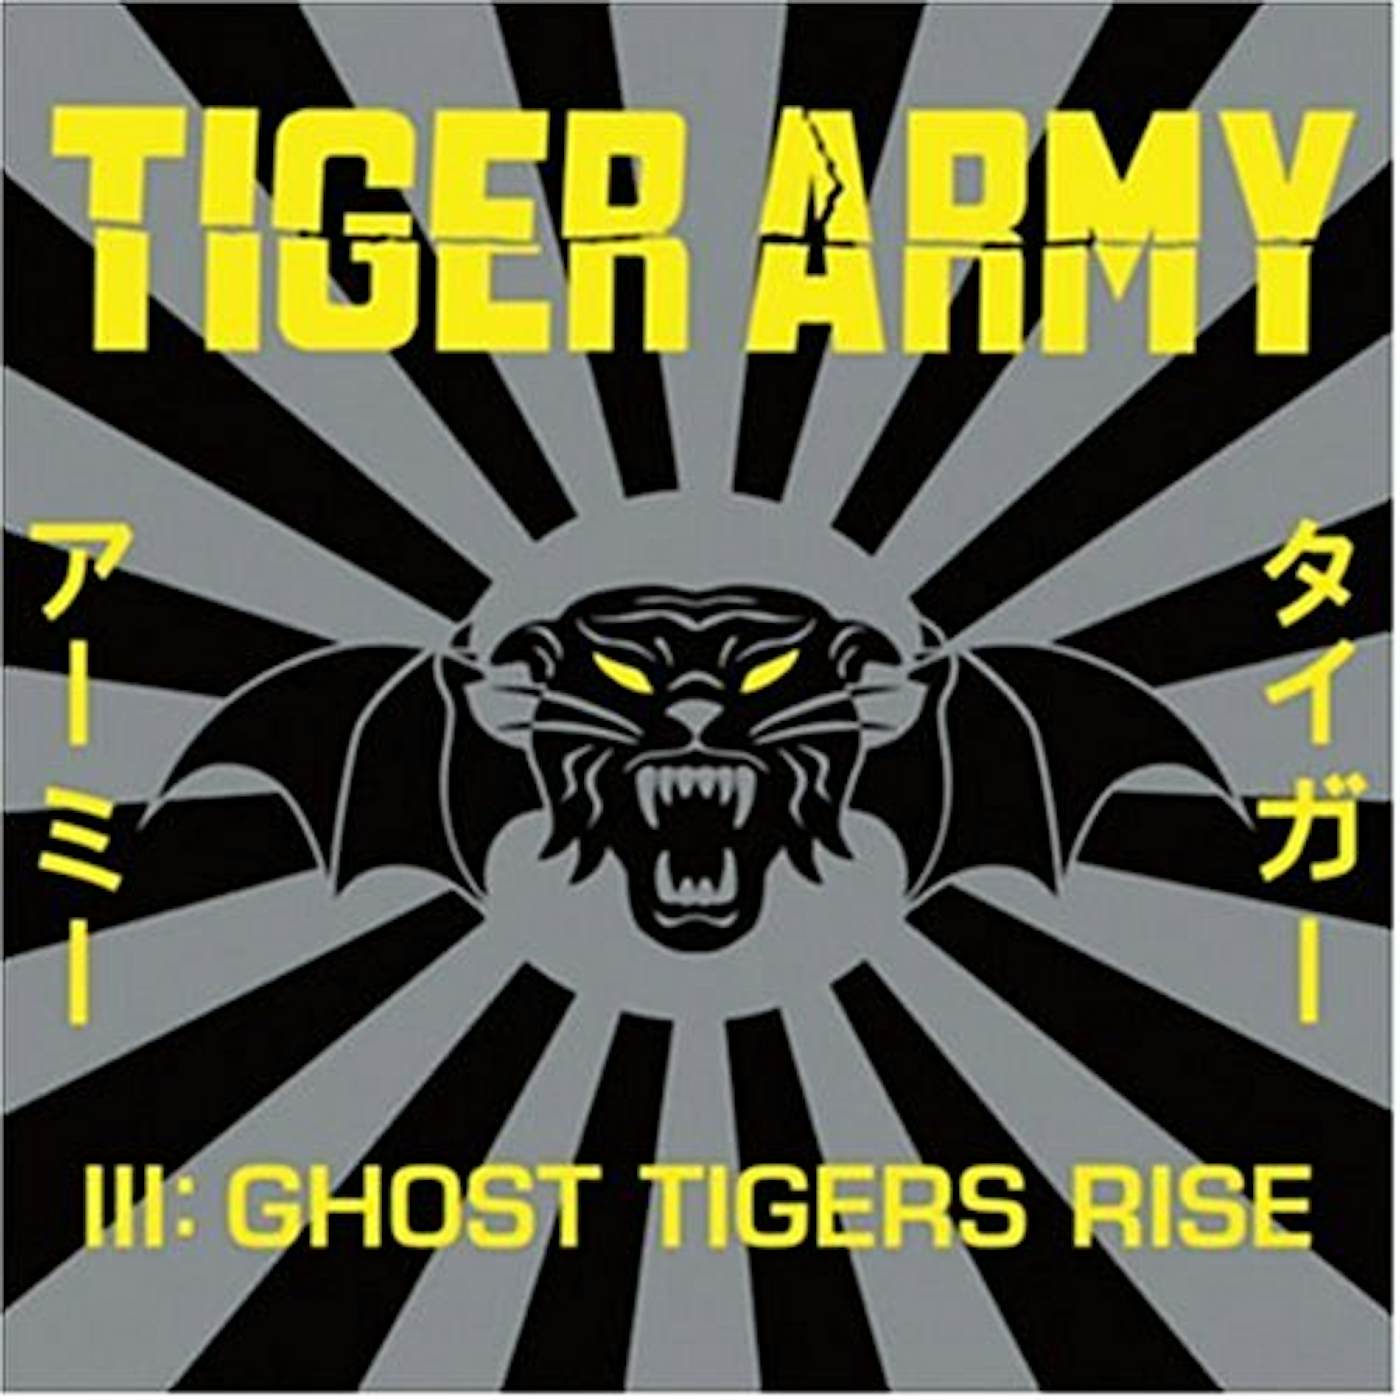 TIGER ARMY III: GHOST TIGERS RISE Vinyl Record